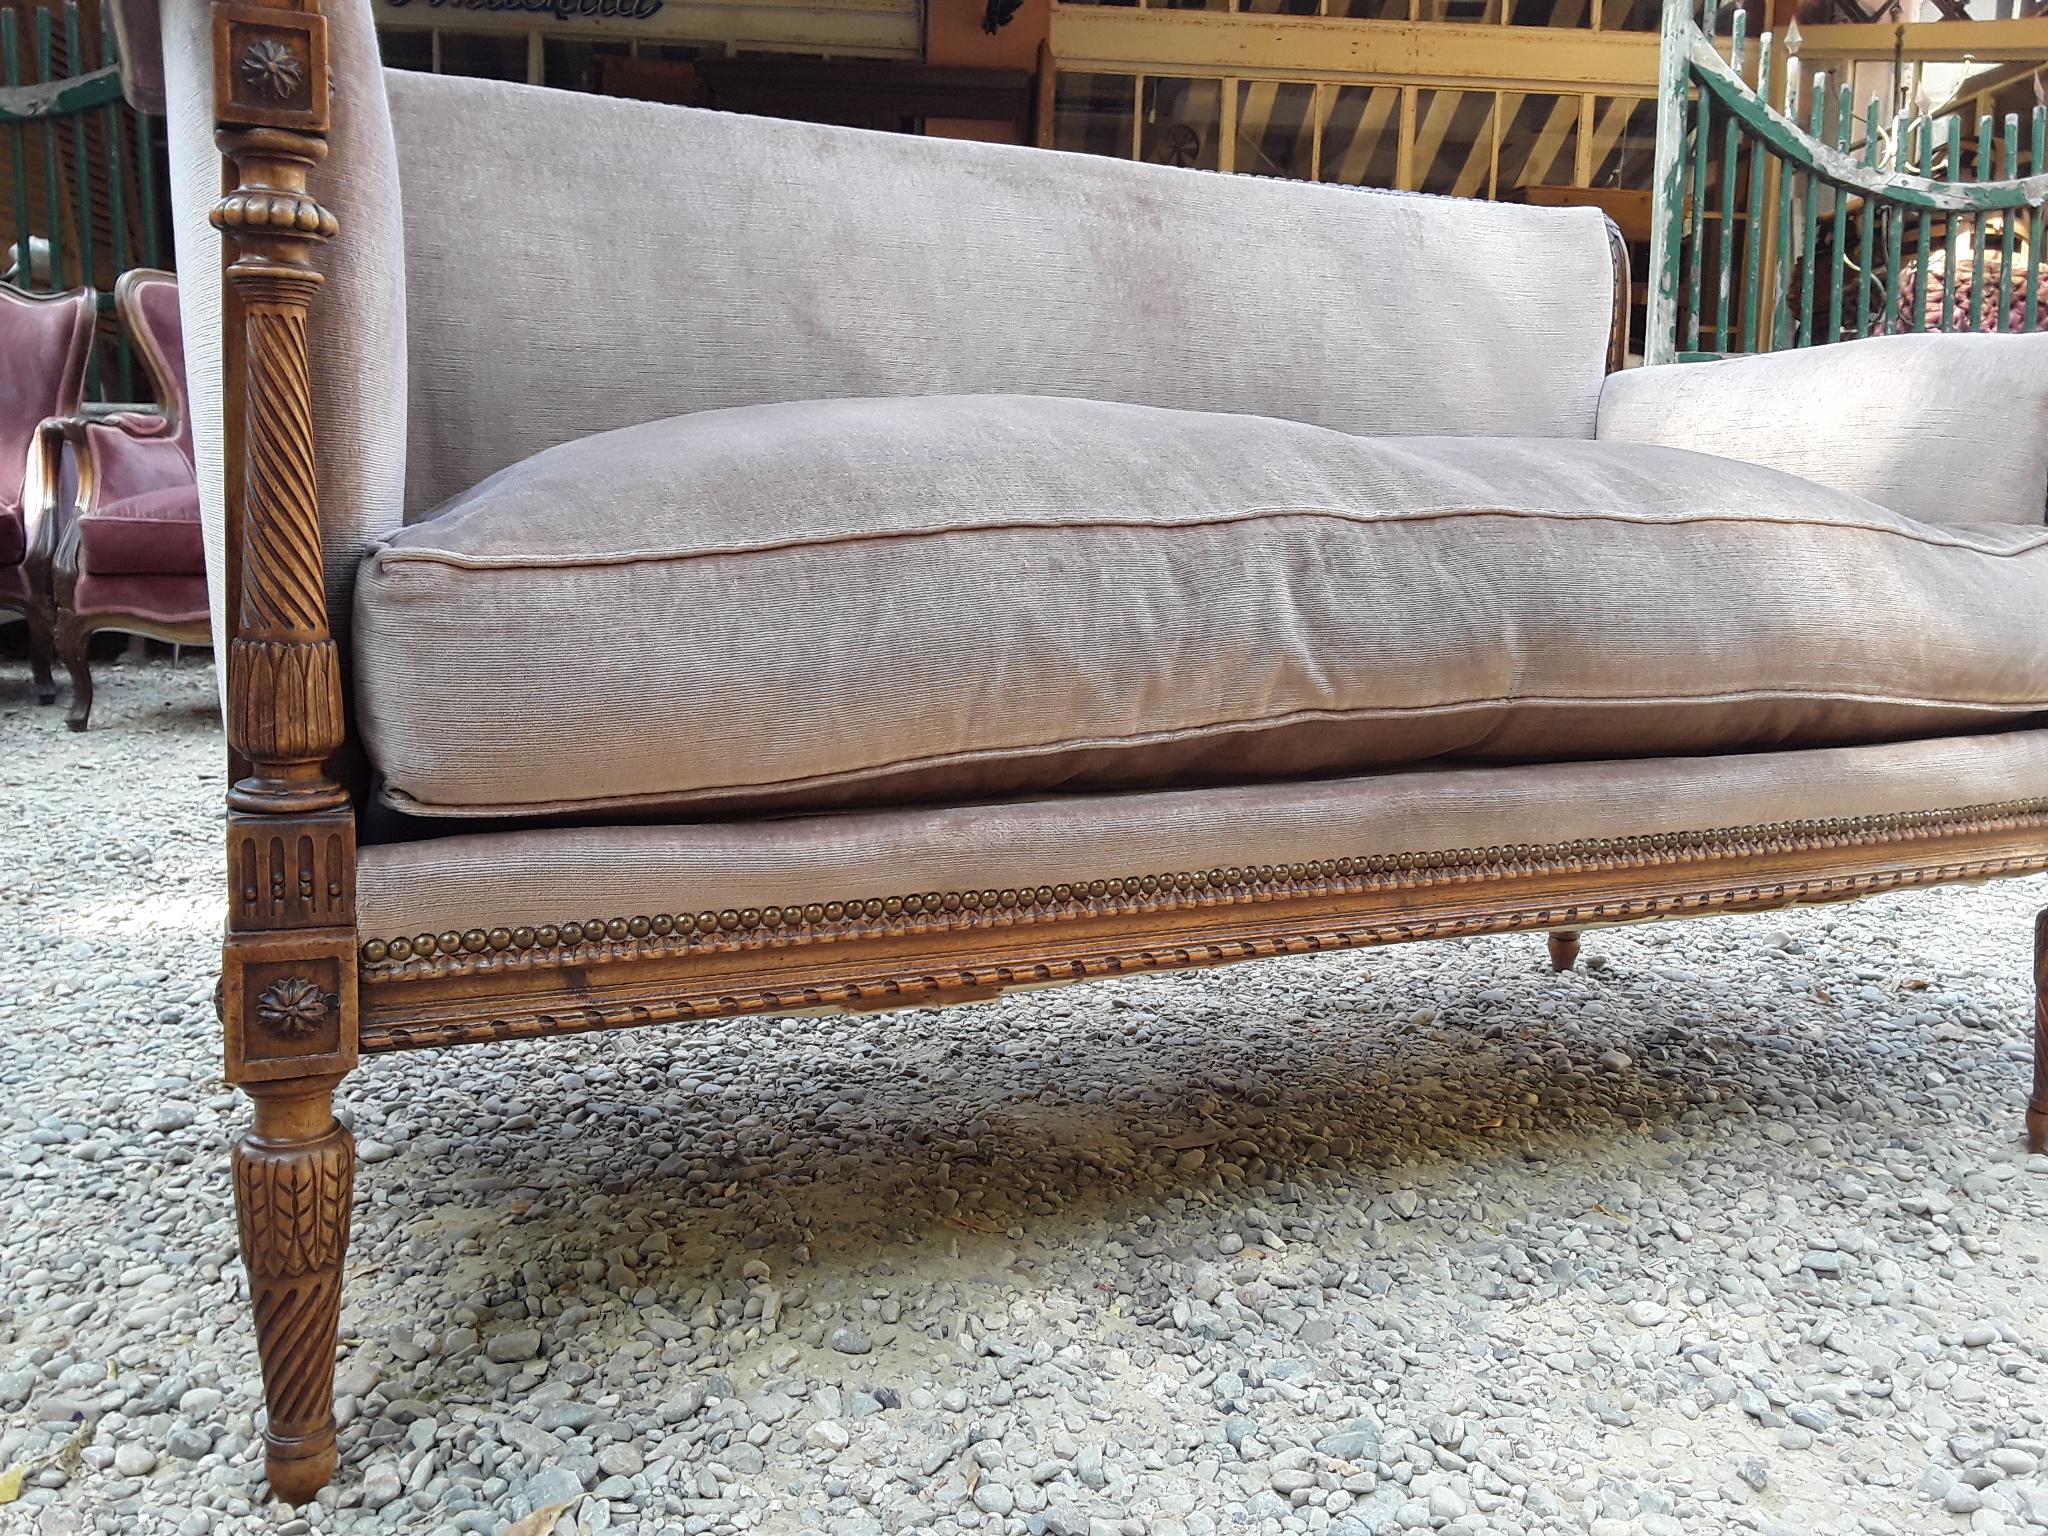 19th Century French Carved Wood Sofa with Original Fabric (Geschnitzt) im Angebot